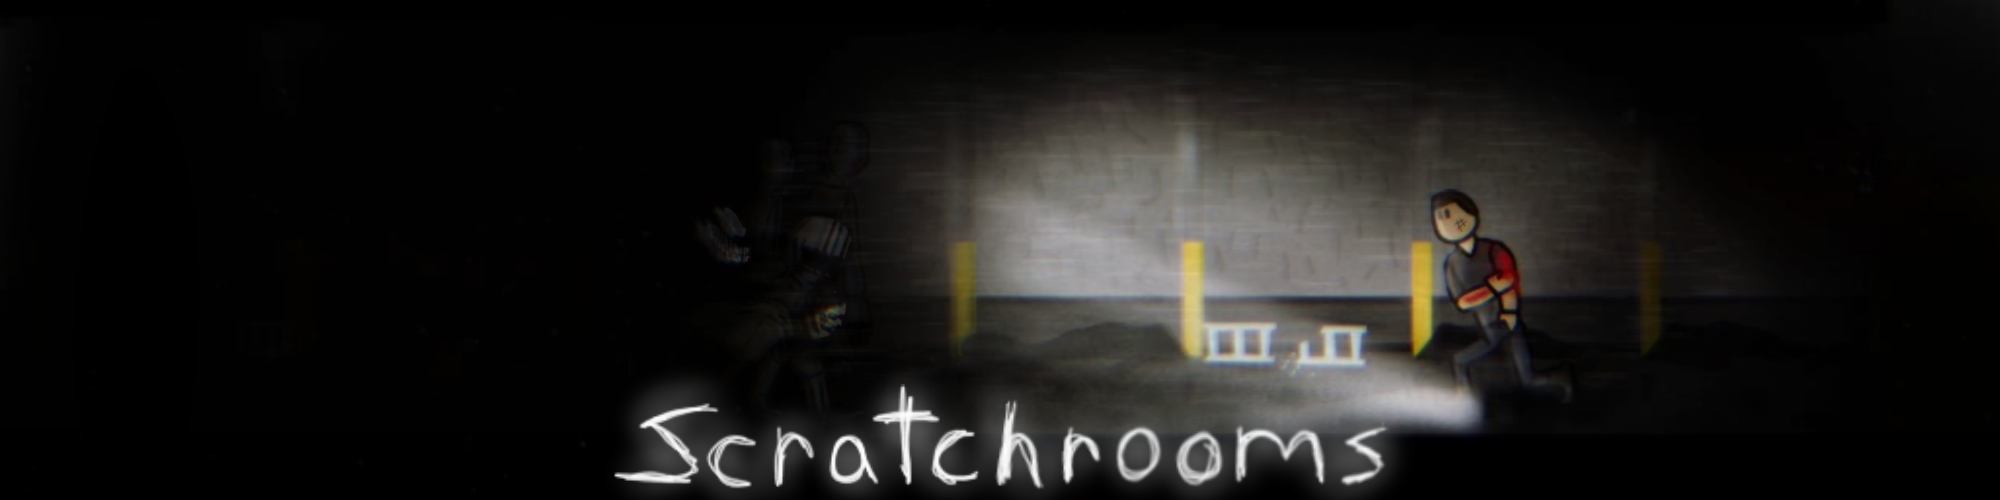 The Scratchrooms